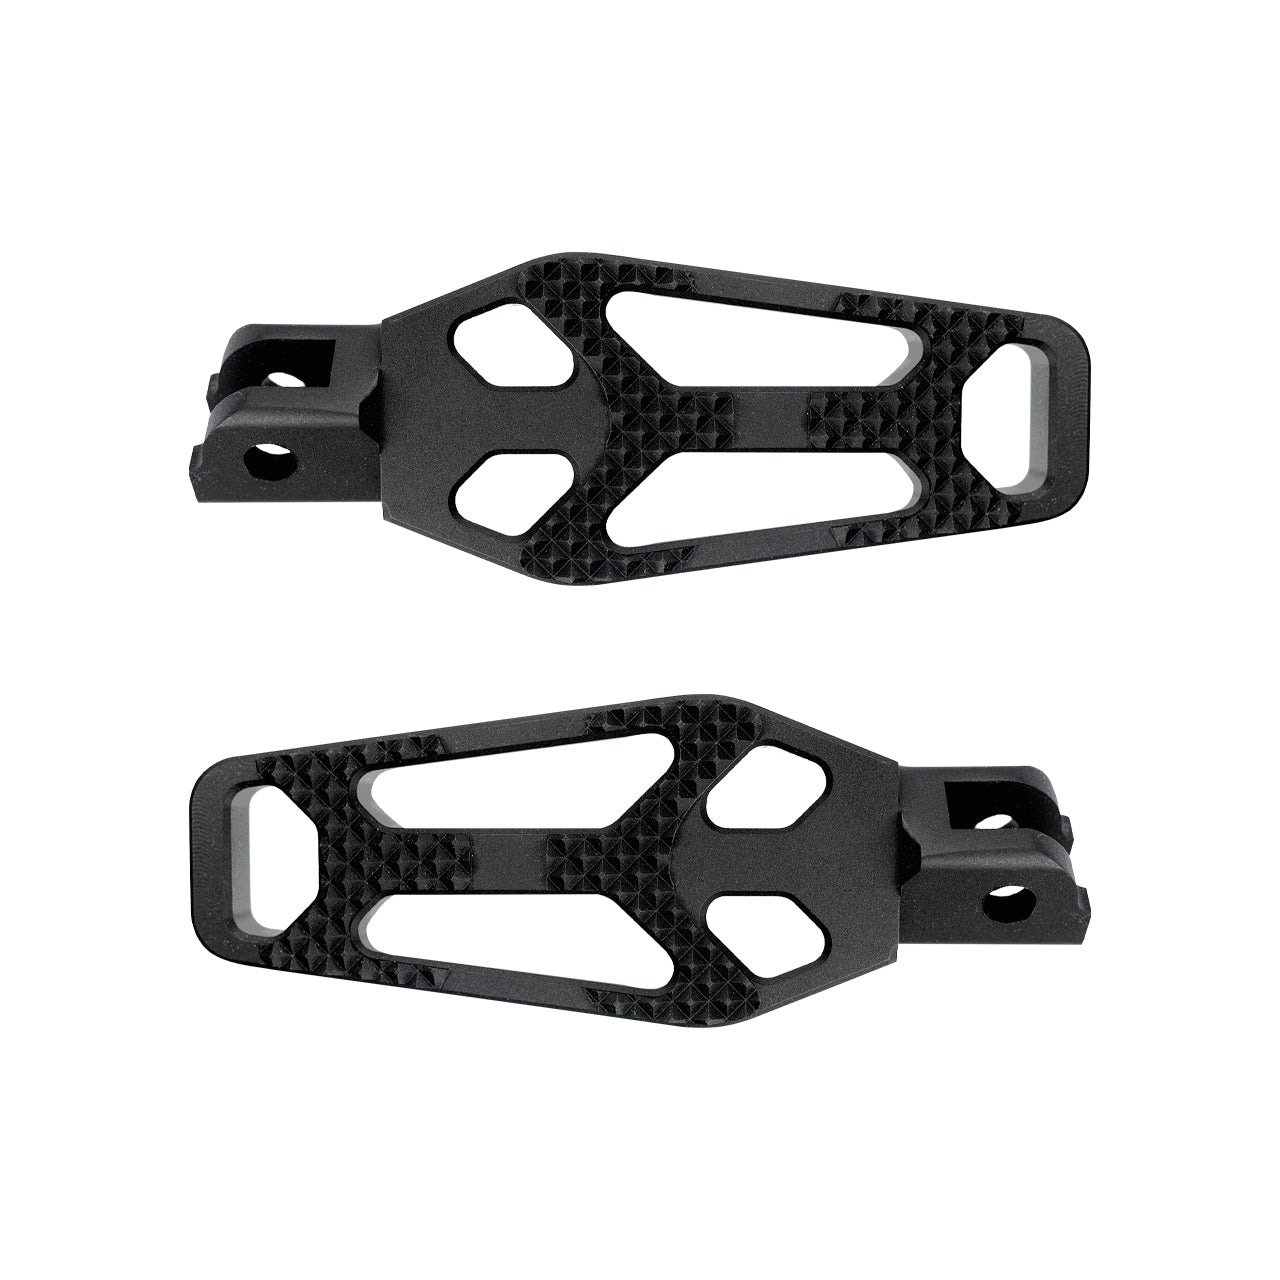 Crook Series Driver Foot Pegs for Harley Davidson M8 Softail models - Tommy&Sons